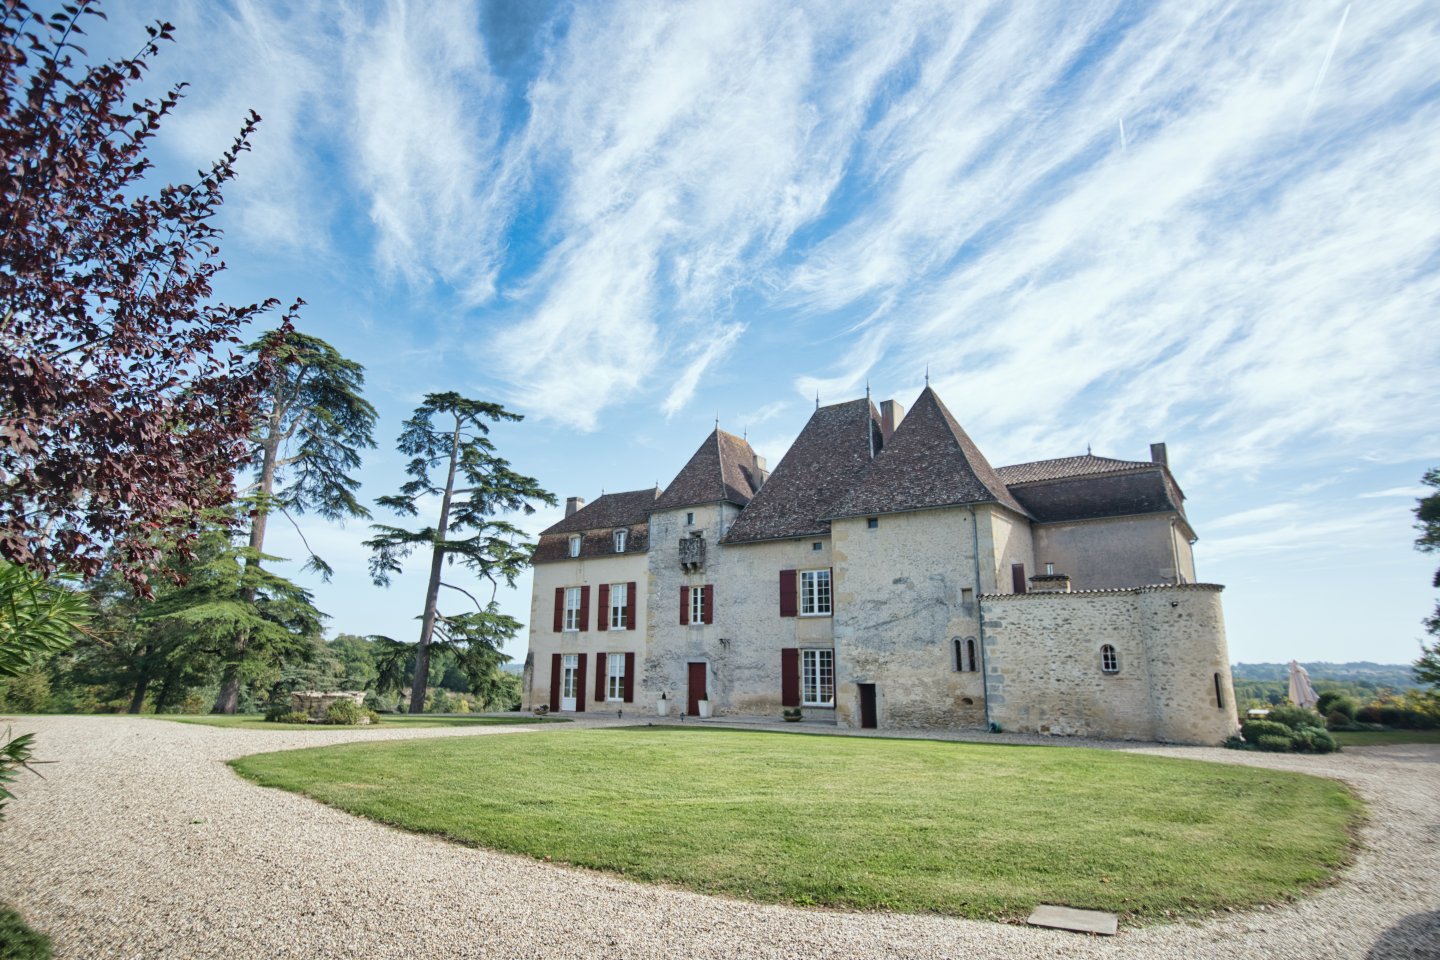 HISTORIC CASTLE WITH ITS WOODED PARK OF MORE THAN 9 HECTARES AND A BREATHTAKING VIEW OF THE LANDSCAPE